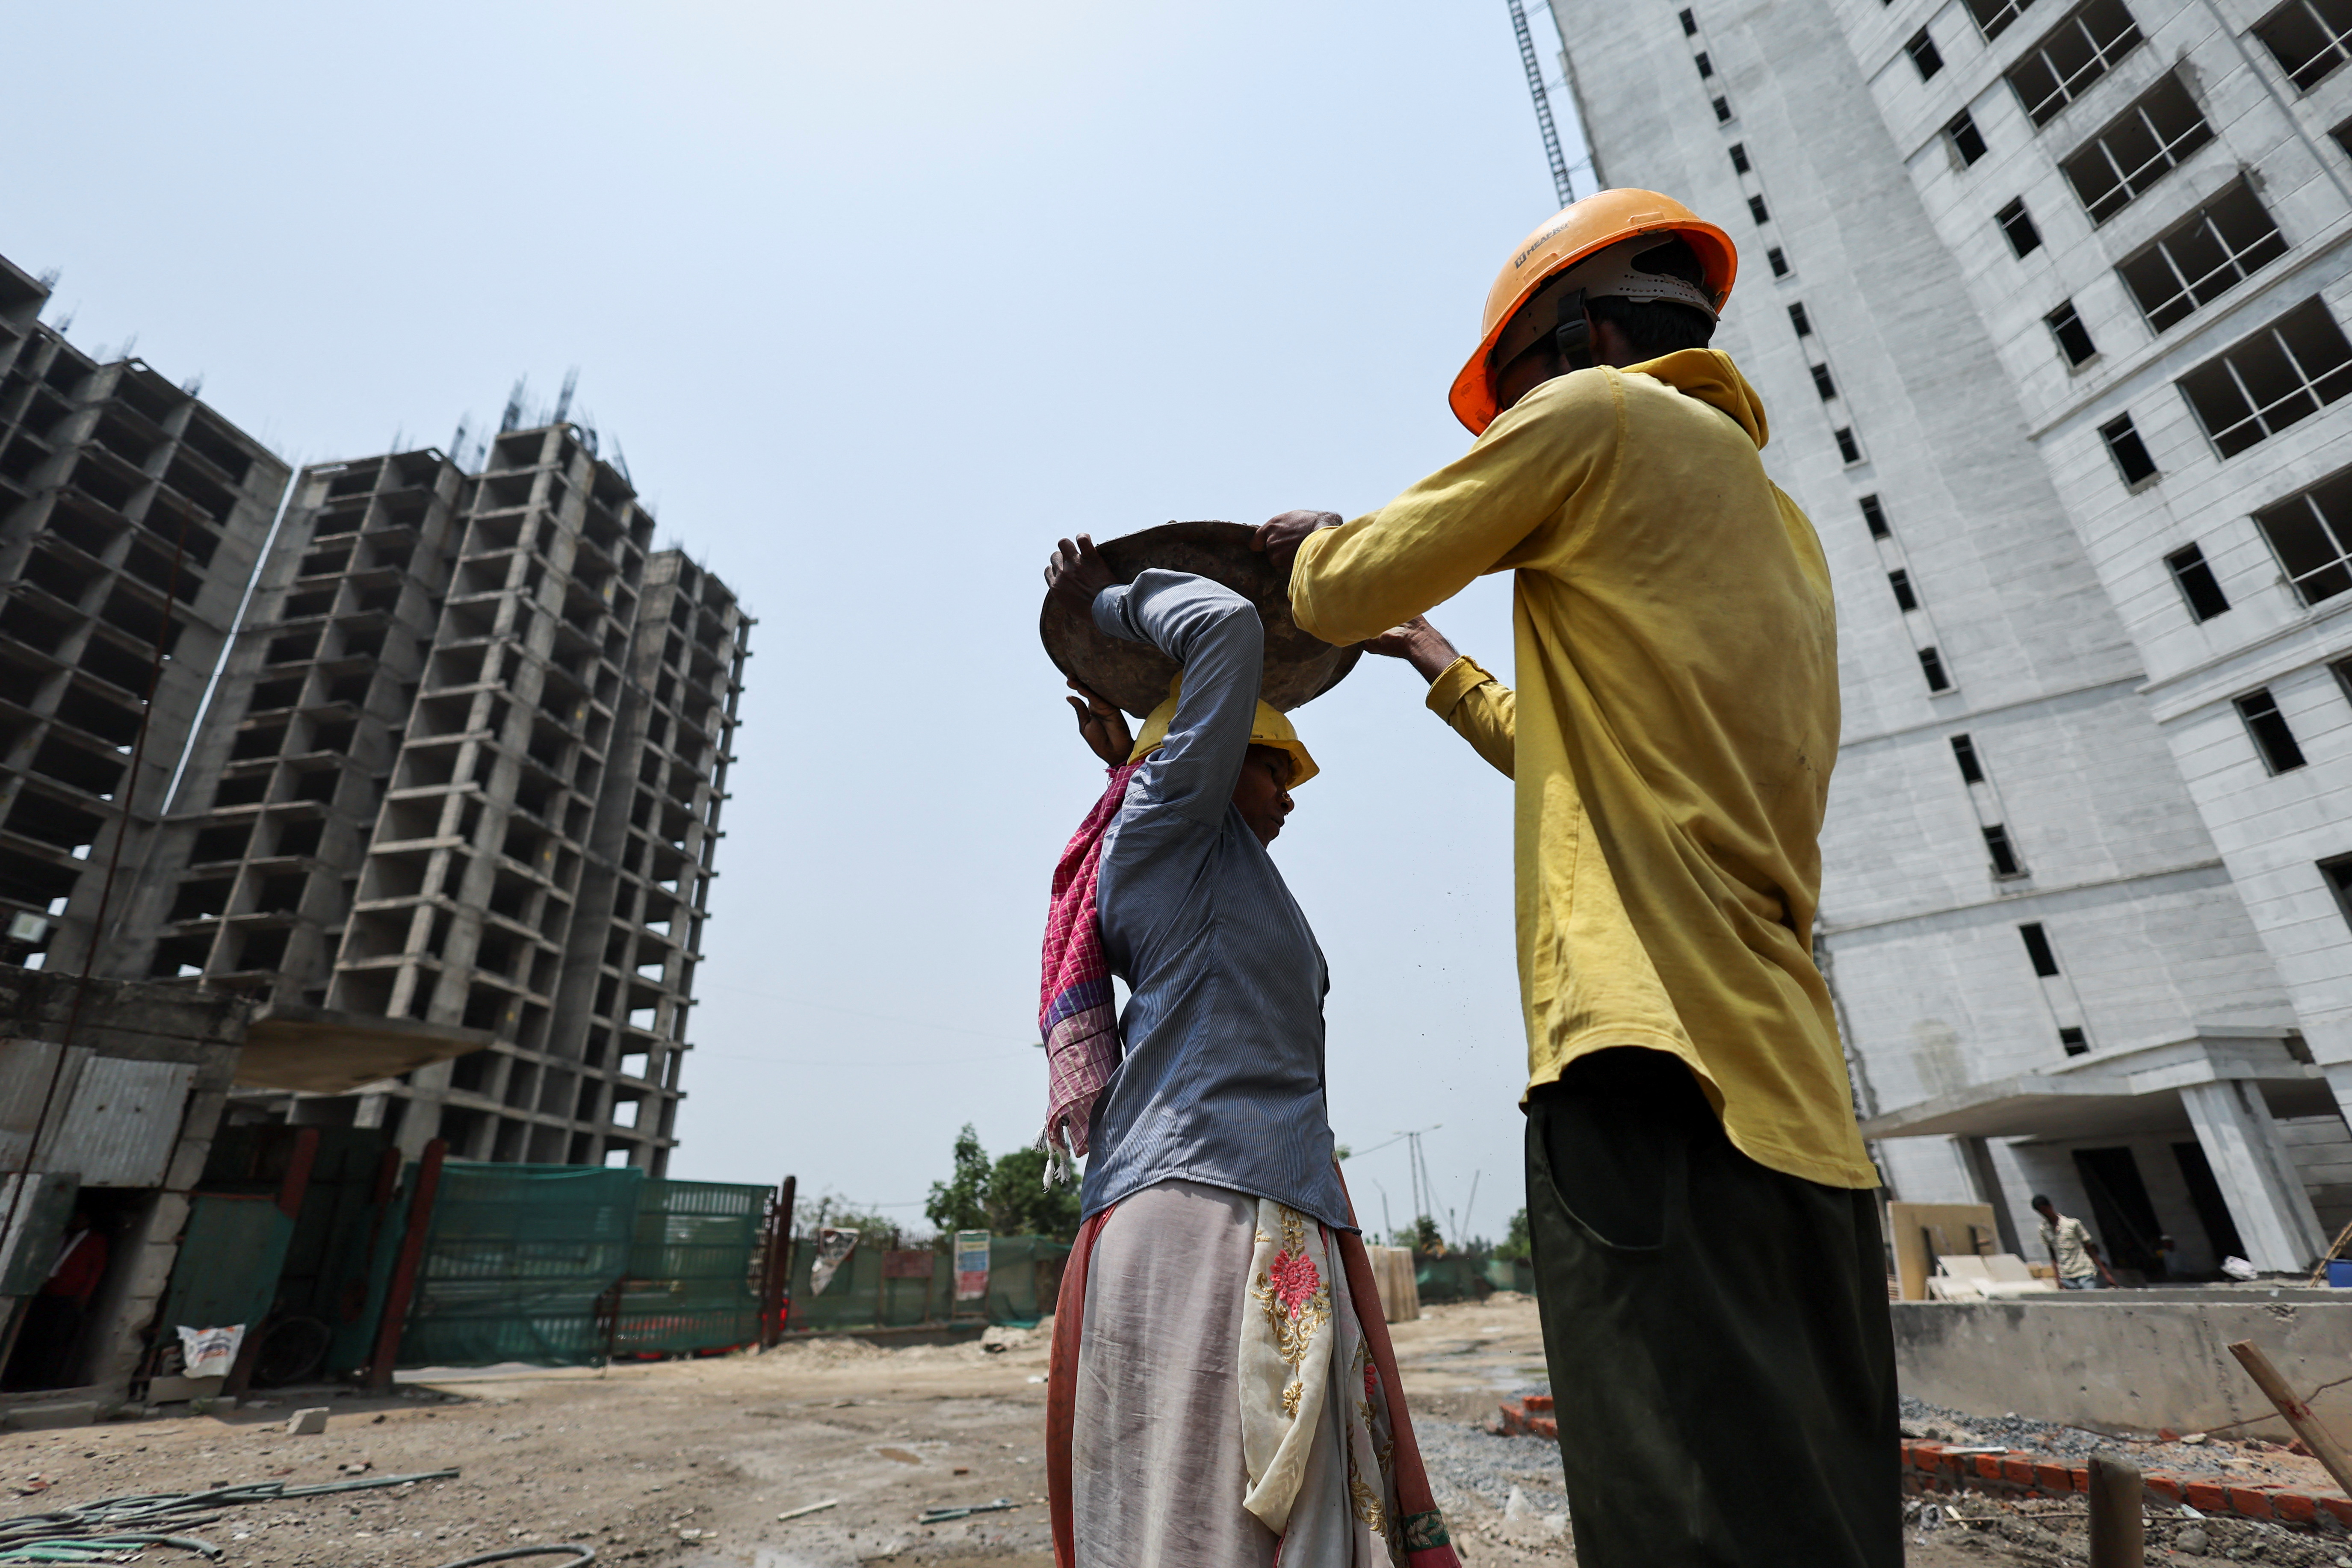 Labourers work at a construction site on a hot summer day, in Noida